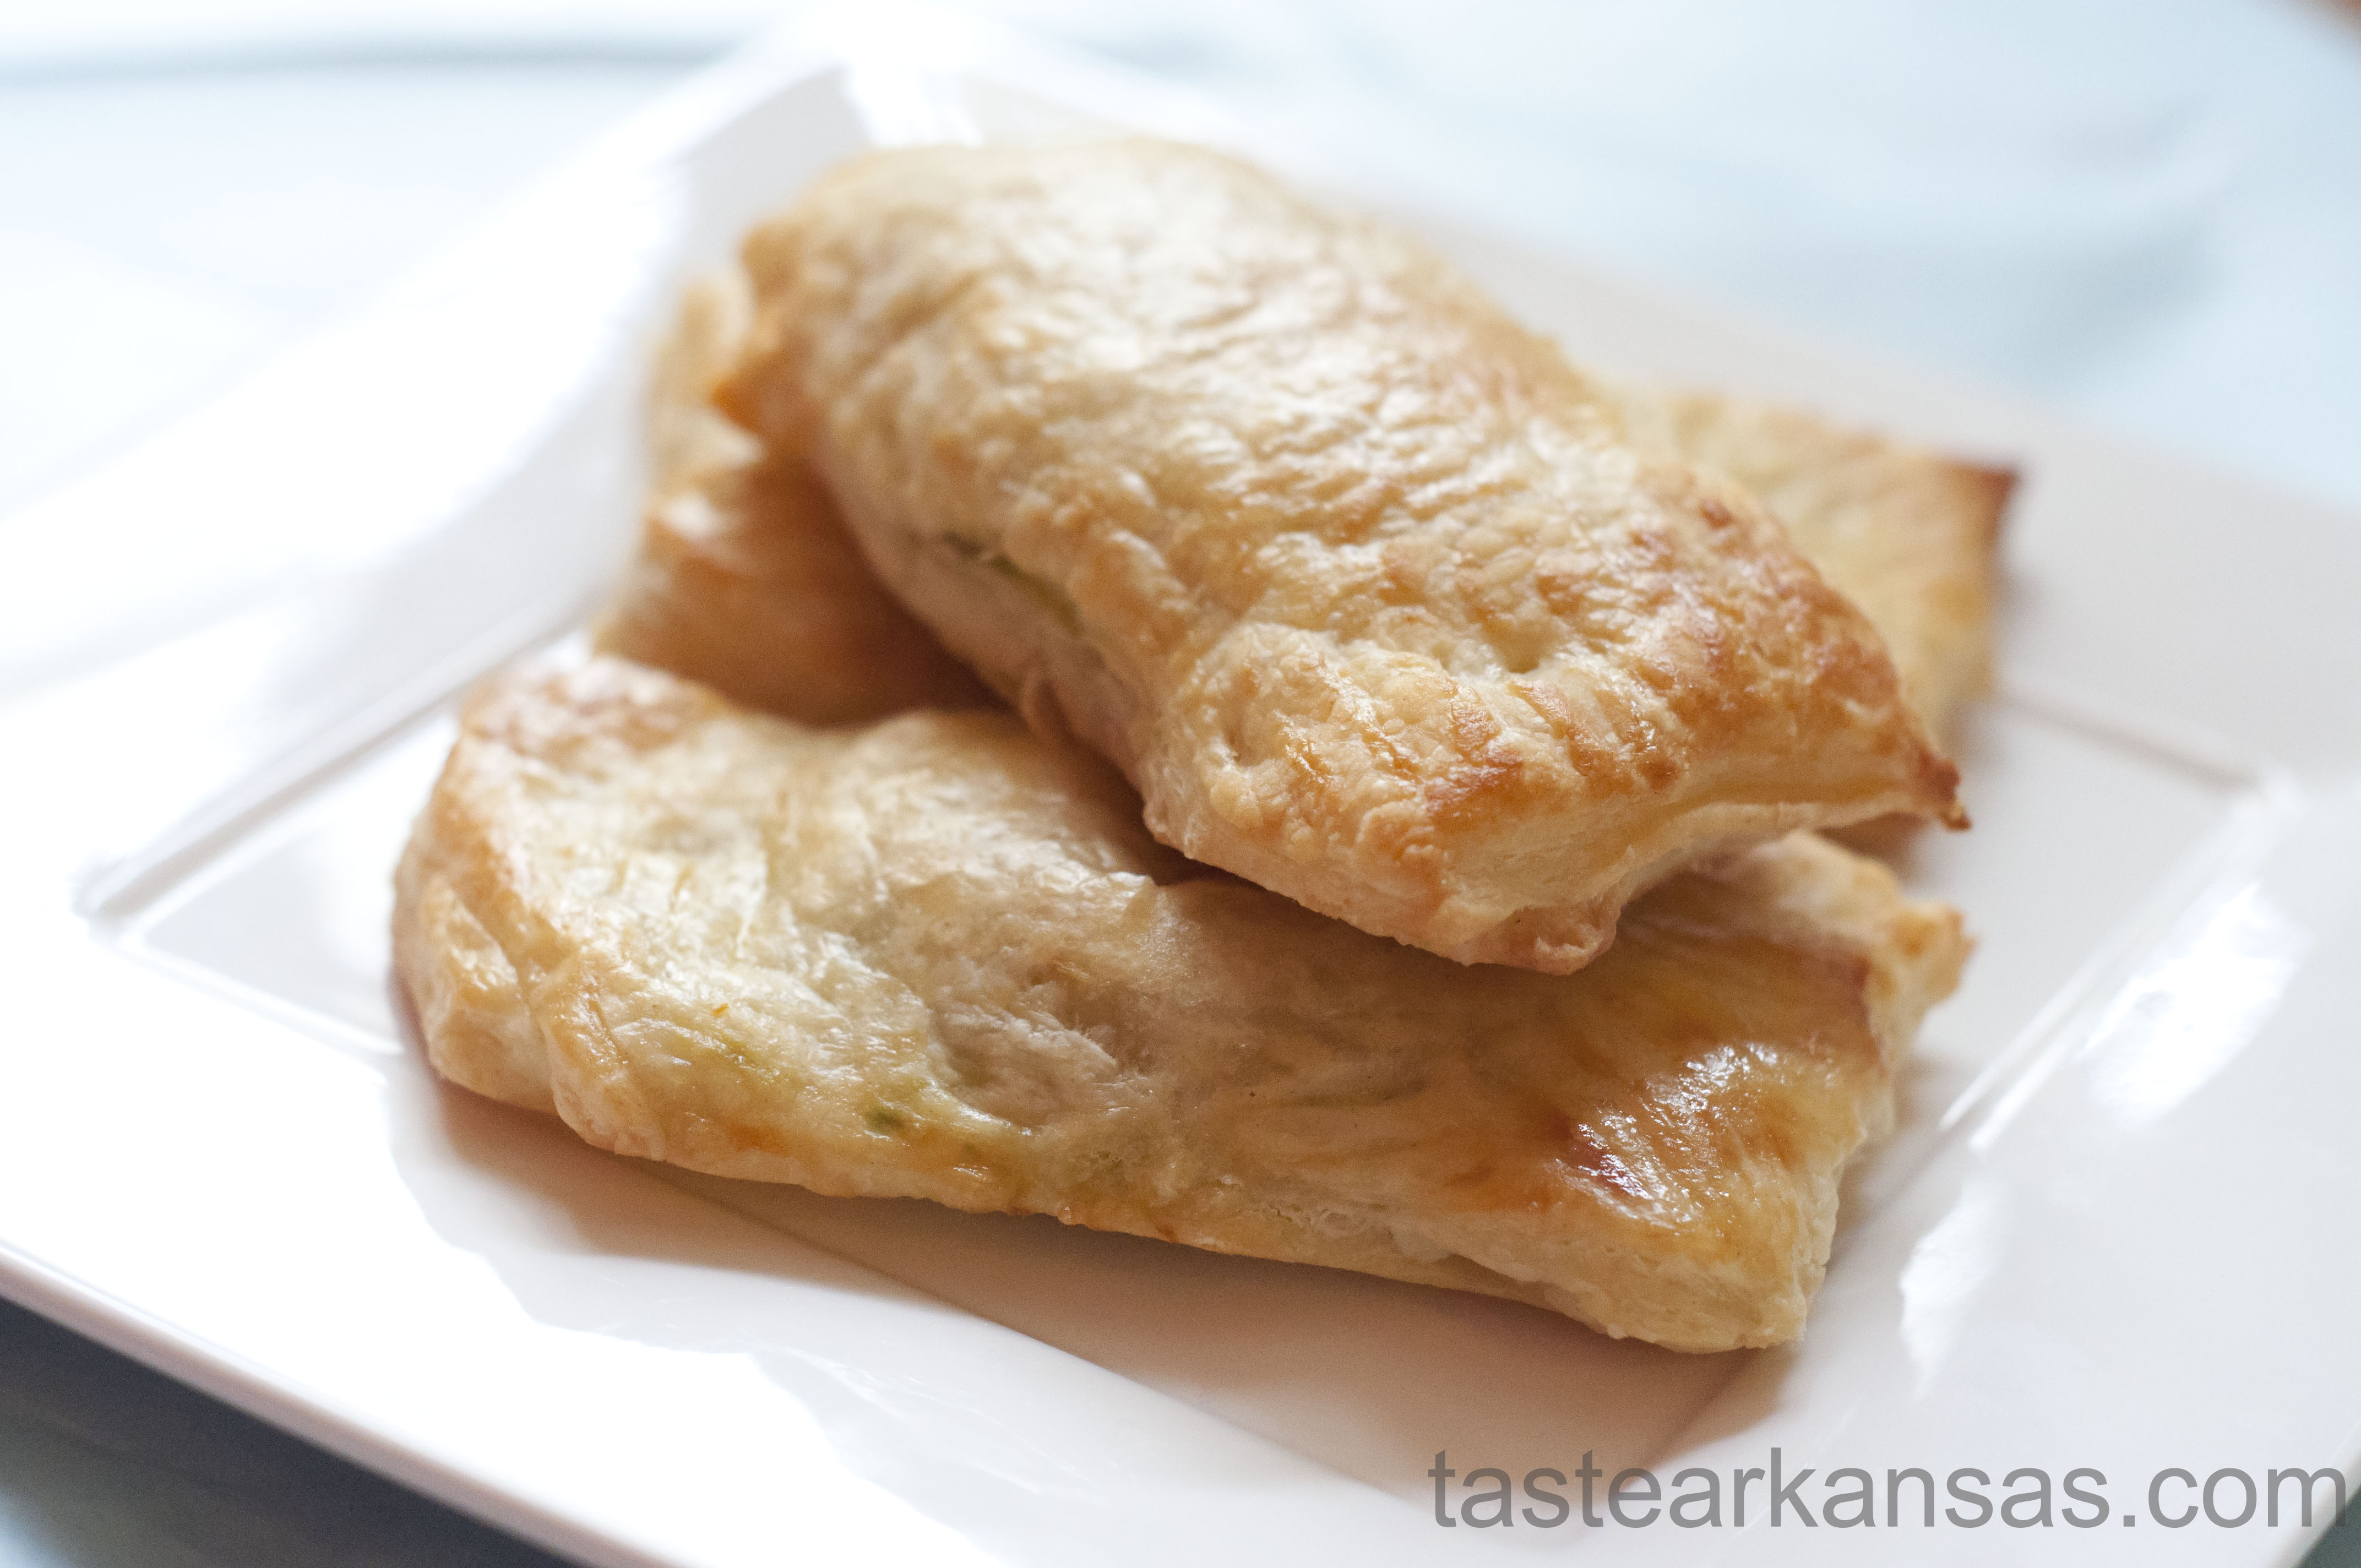 This picture shows a lightly browned, puff pastry packet that is filled with a warm mixture of avocado, cream cheese and salsa. The edges are brown and the pastry is buttery, flaky and delicious.